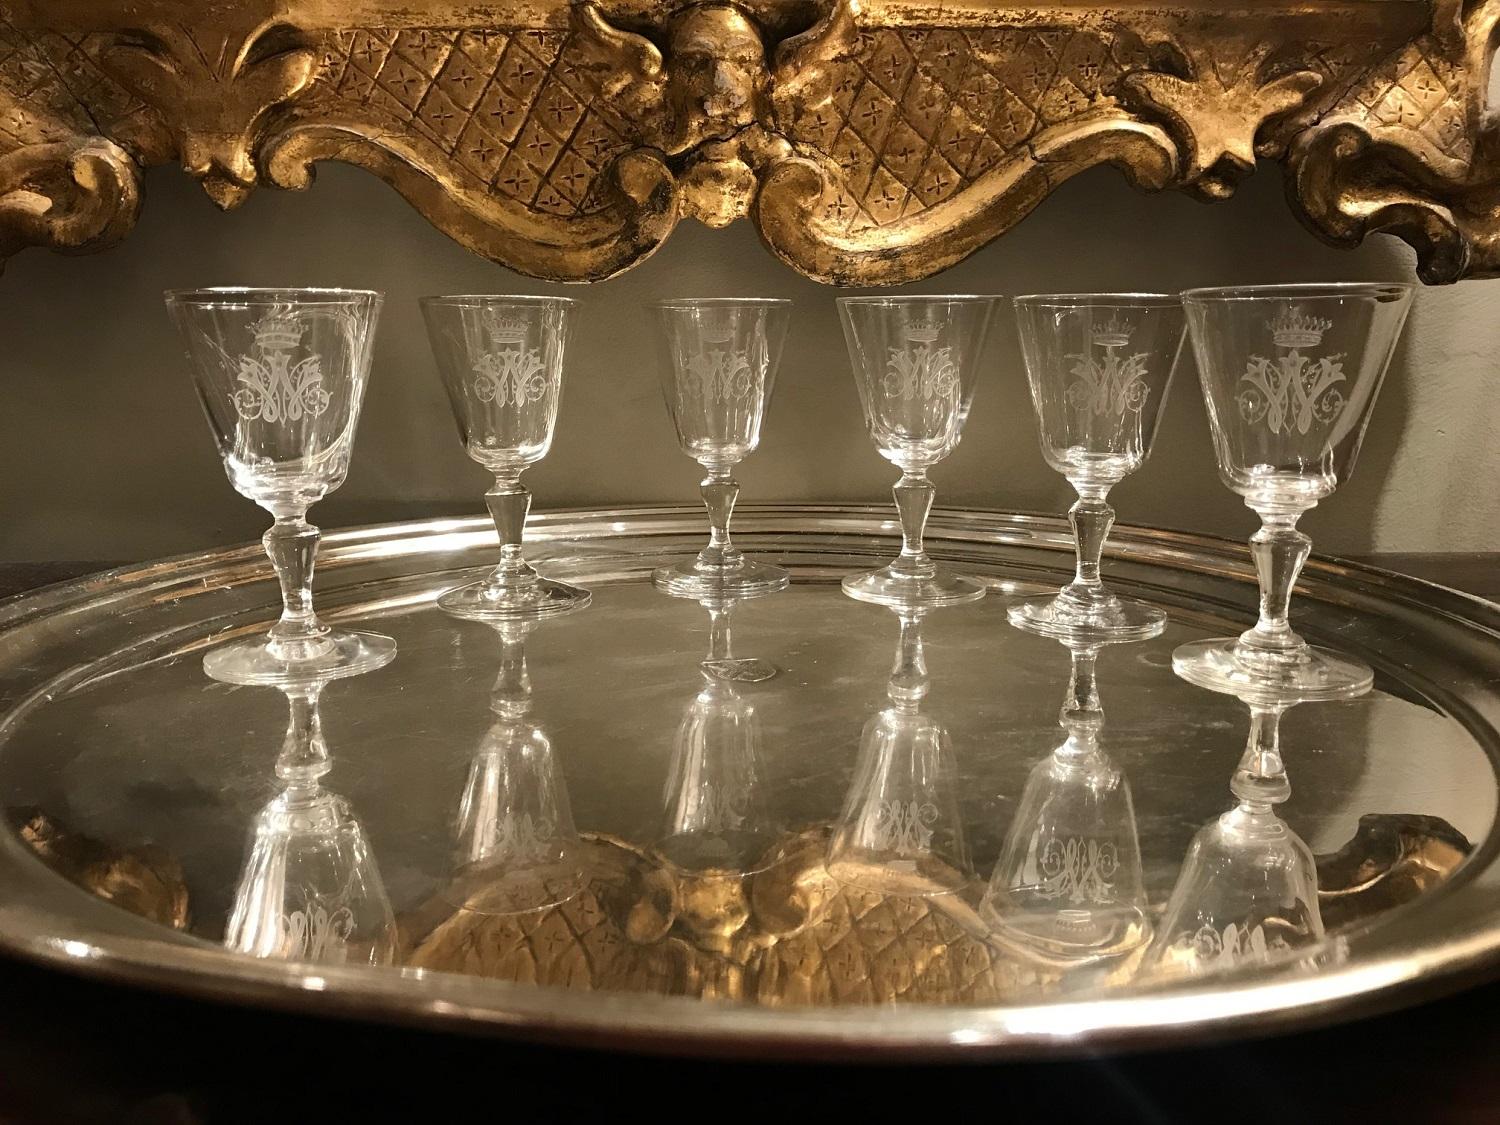 A set of 6 exquisite 19th century French crystal liquor glasses engraved with monogram and coronet. Unsigned but of Baccarat quality.